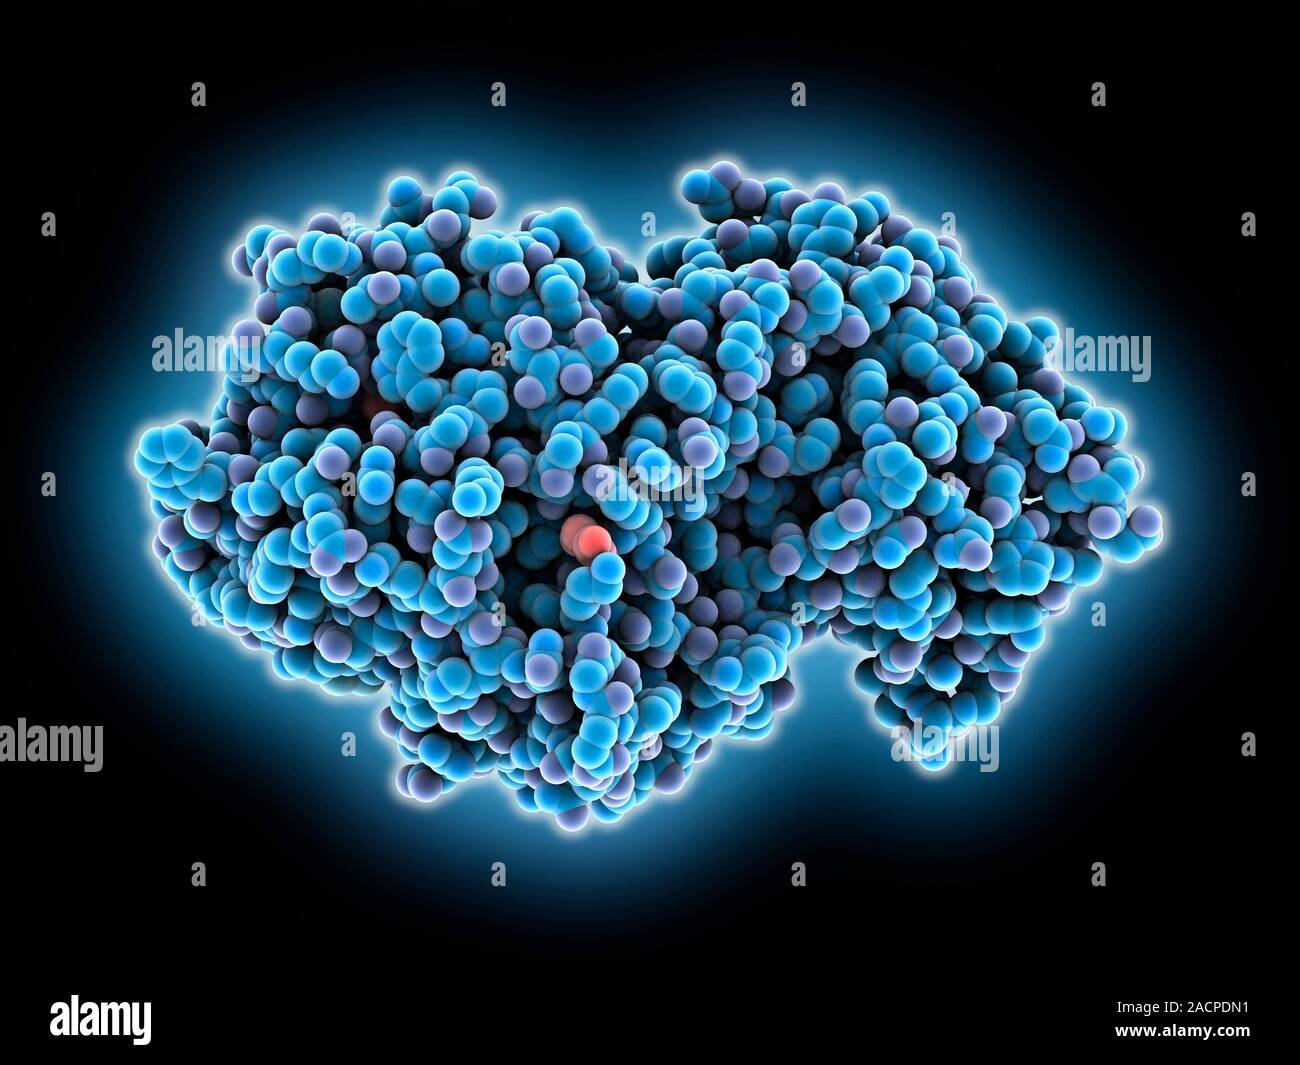 Amylase. Molecular model of the enzyme alpha-amylase from human saliva. Amylase catalyses the breakdown of starch to sugars, and so starts the digesti Stock Photo